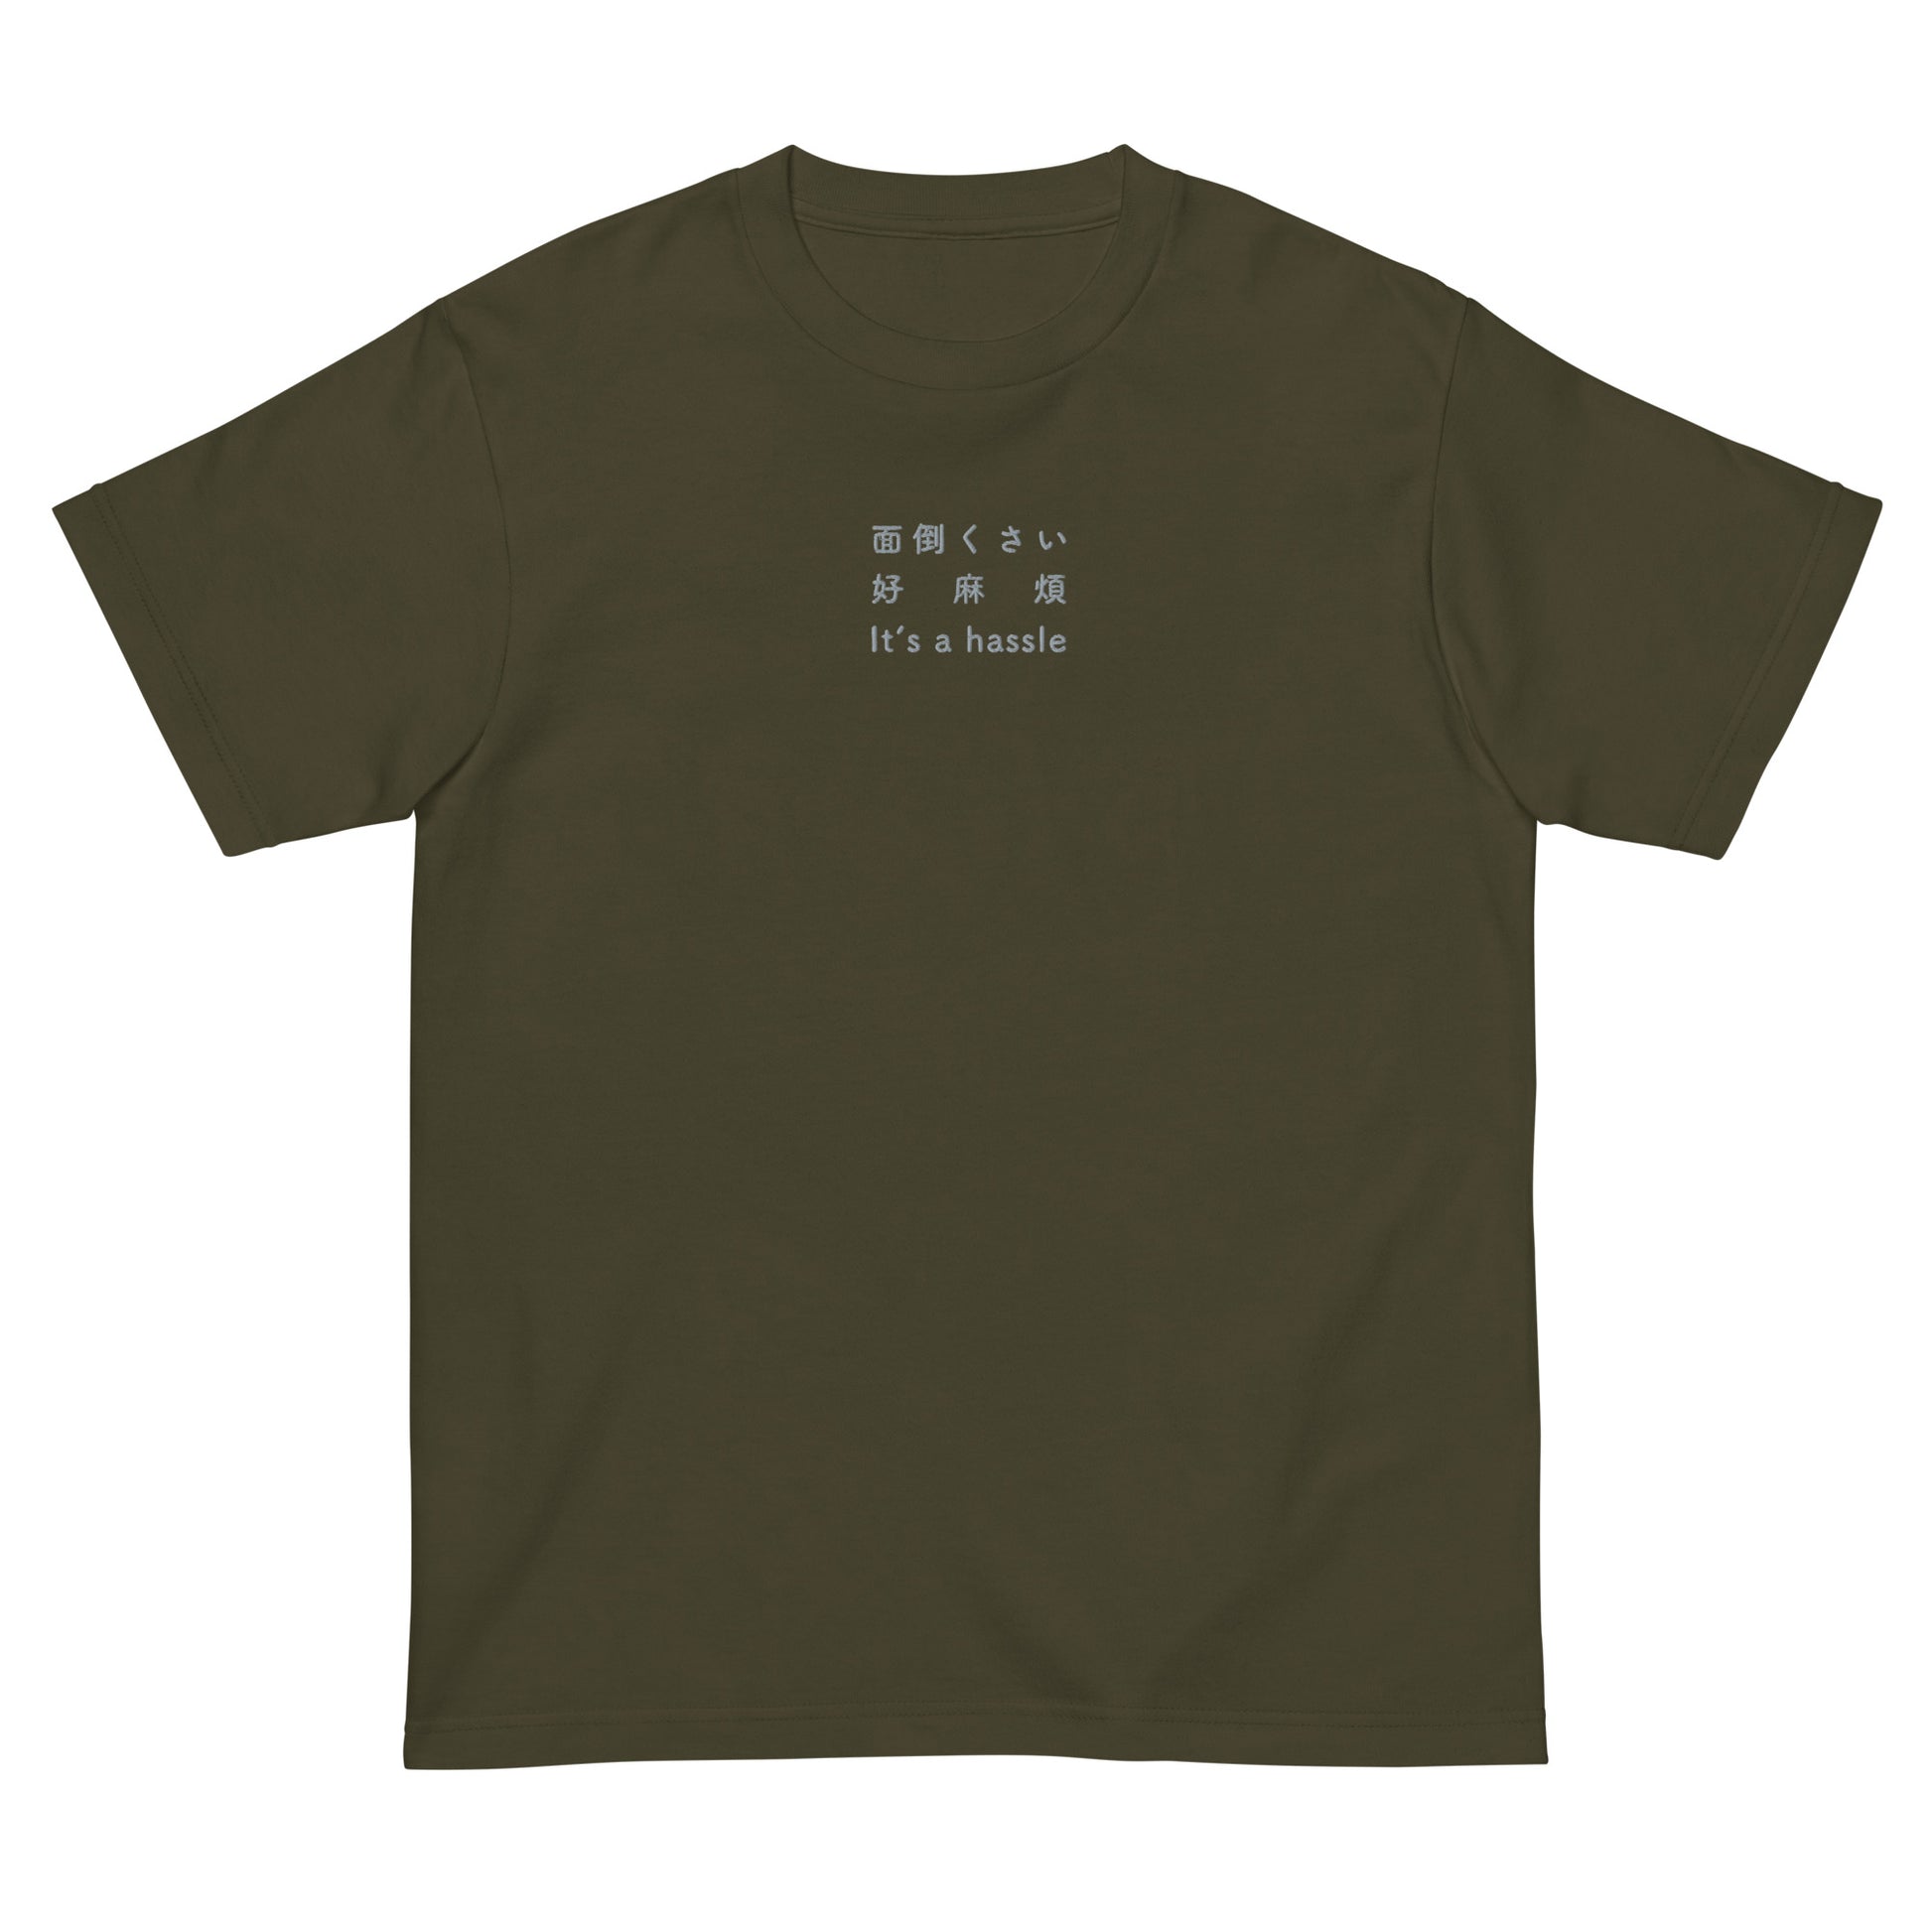 Green High Quality Tee - Front Design with an Light GrayEmbroidery "It's a hassle" in Japanese,Chinese and English